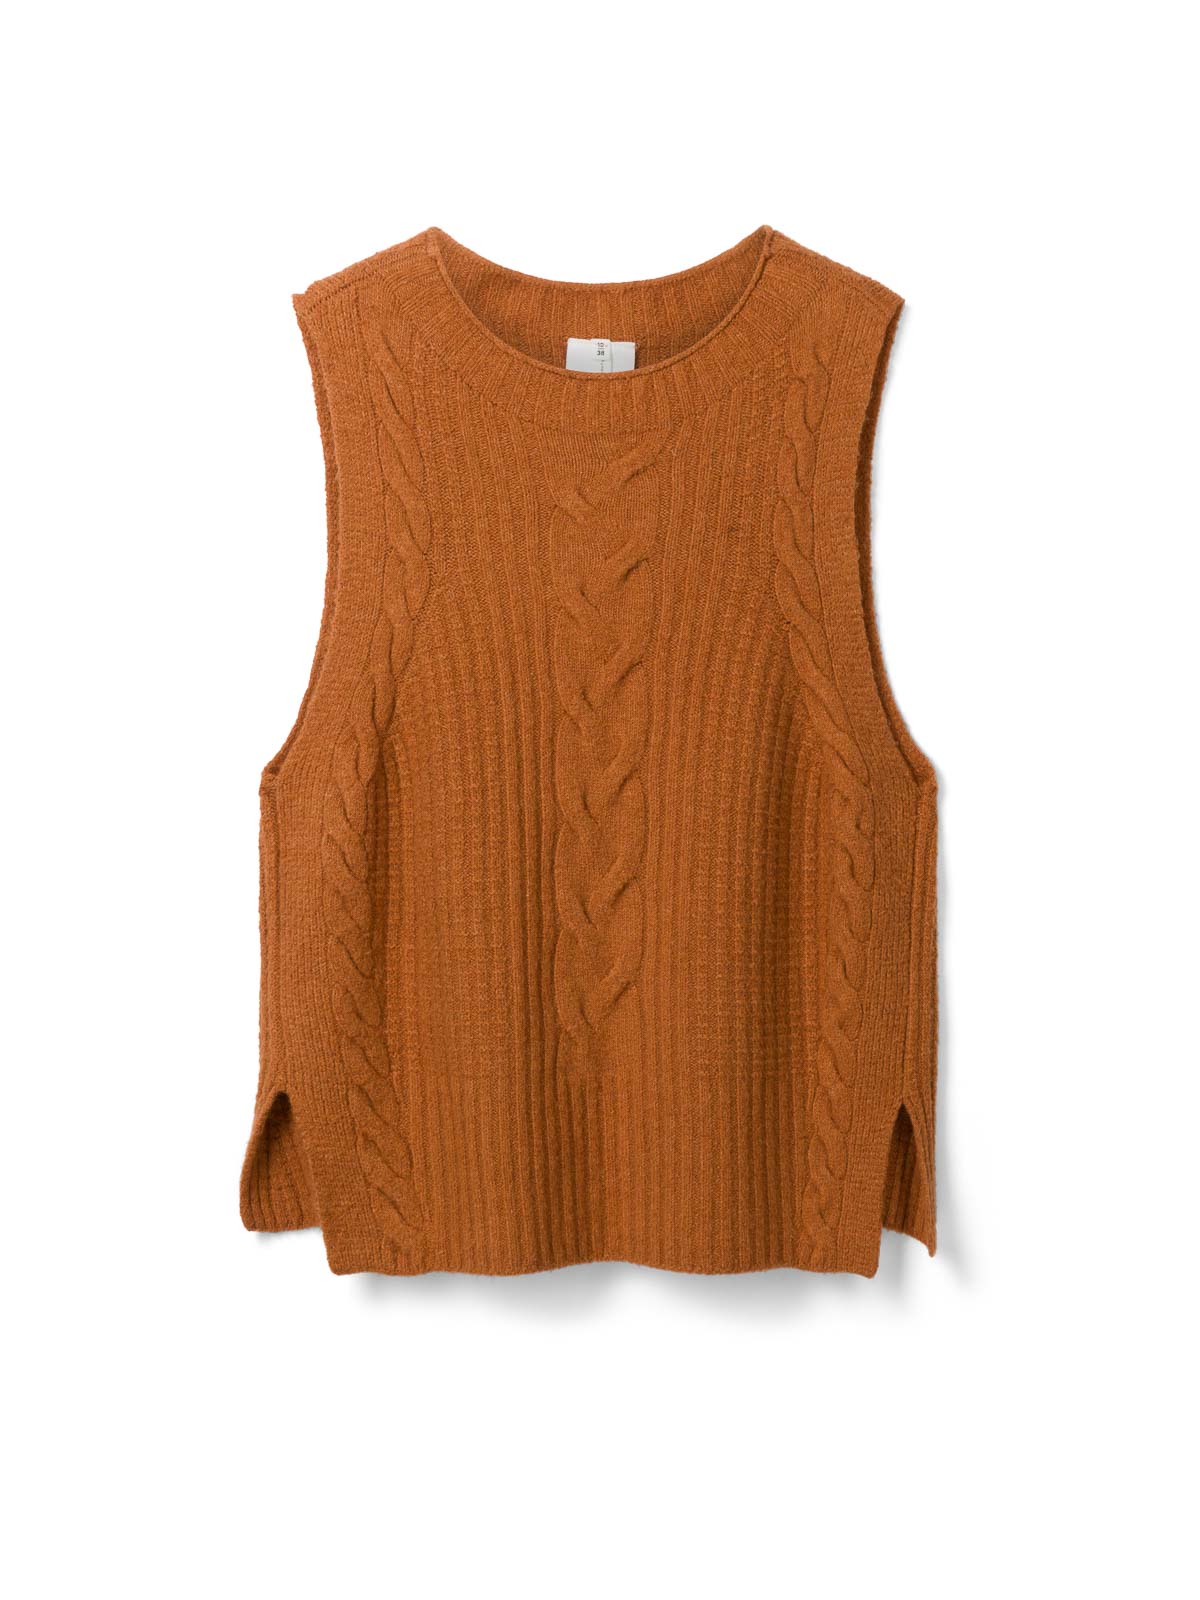 Ayla Organic Cotton Fluffy Knitted Vest - Muscovado Brown